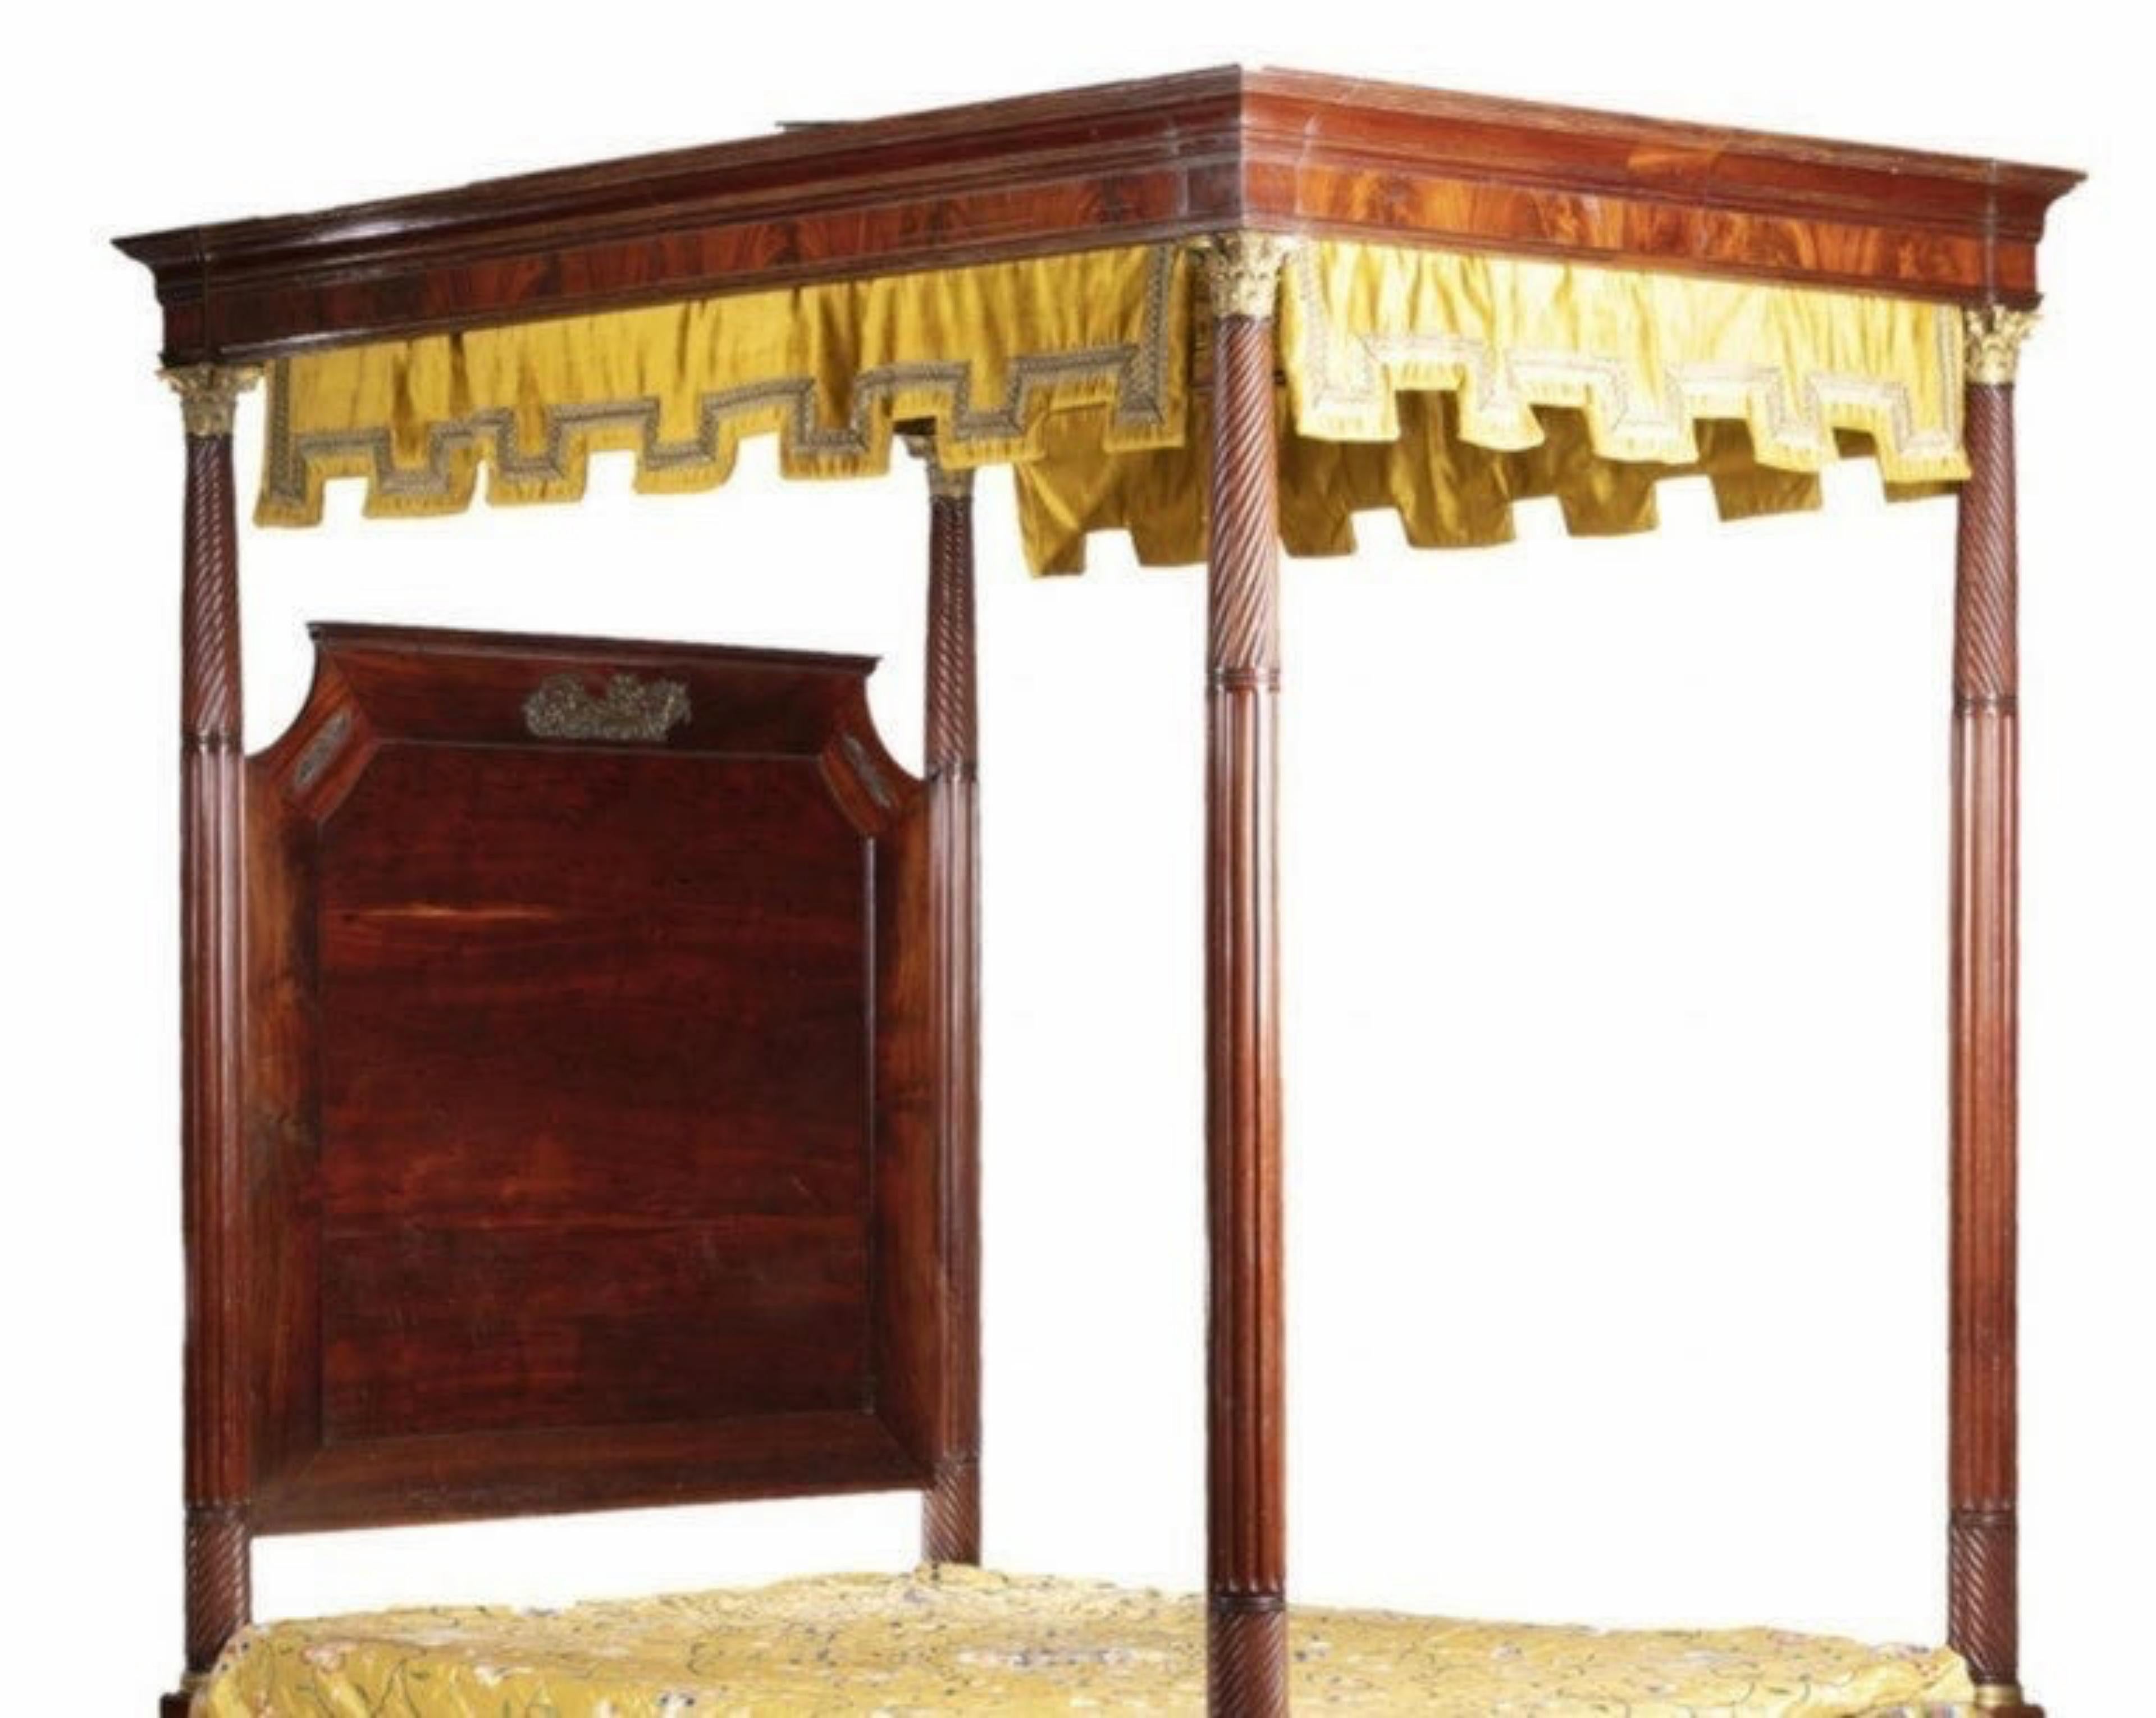 Empire Canopy bed
France
Napoleon III
From the 19th Century,
In mahogany wood with appliqués in gilded bronze and classical figures. 
Fluted columns with Corinthian capitals. 
Ceiling lined with green velvet. 
Dimensions.: 256 x 221 x 157